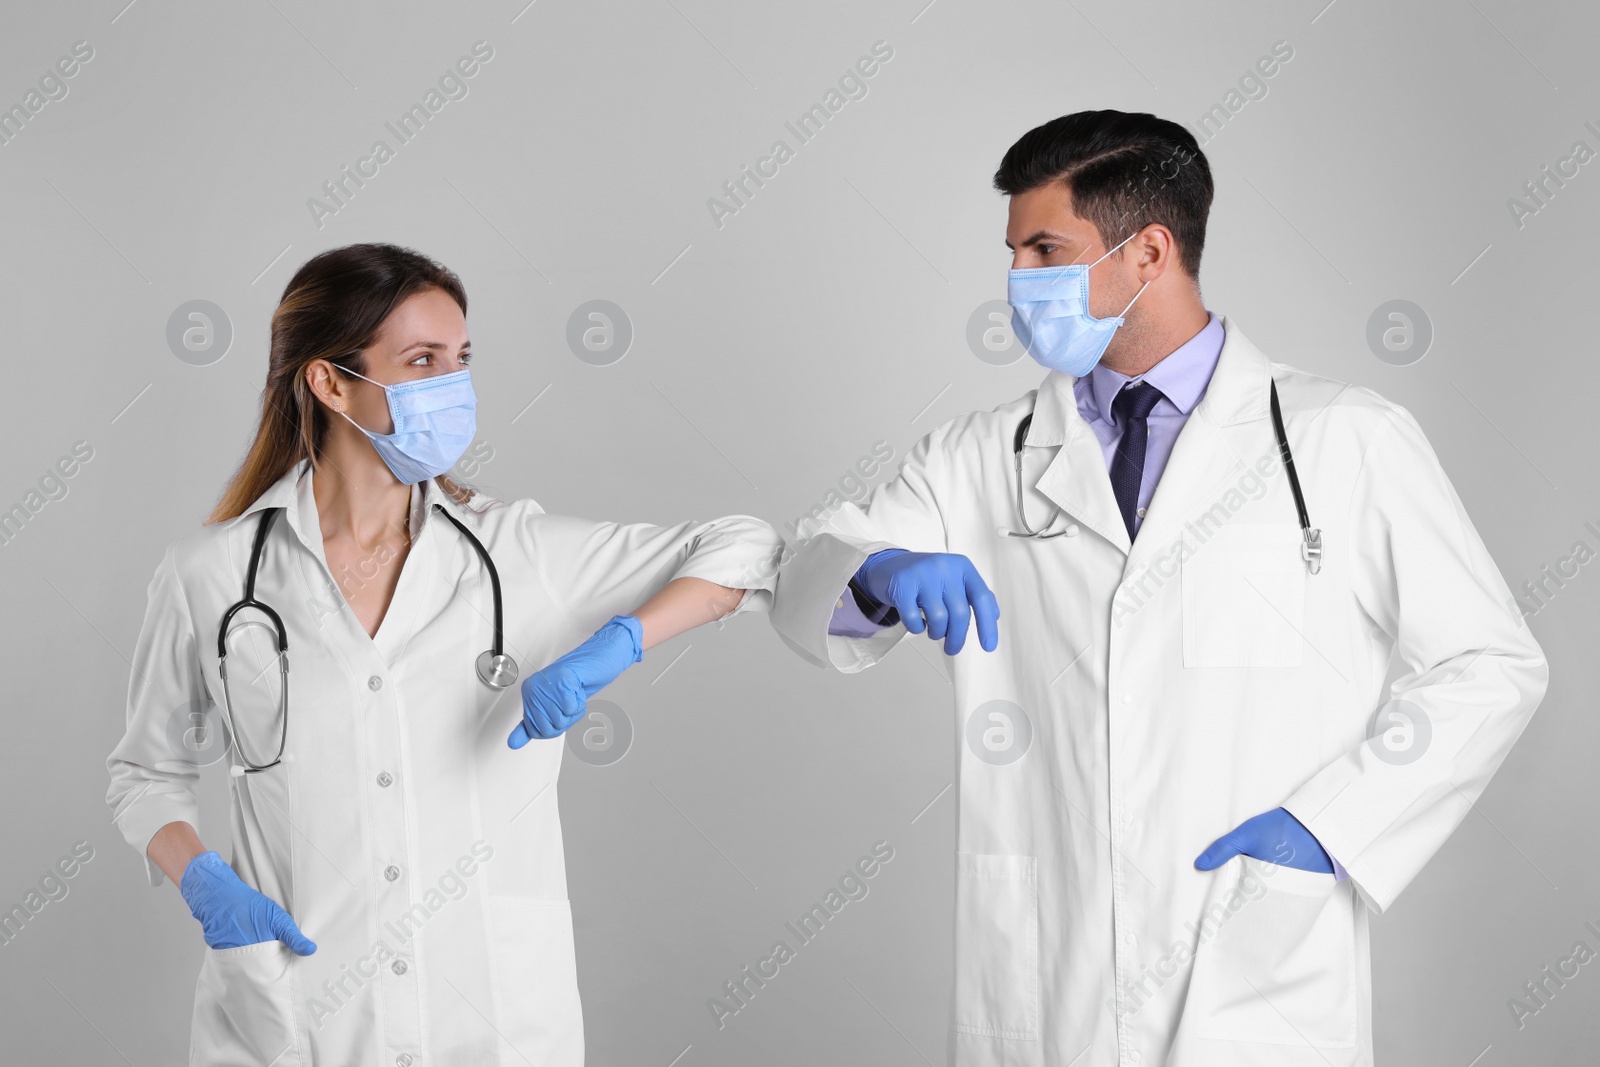 Photo of Doctors greeting each other by bumping elbows instead of handshake on light grey background